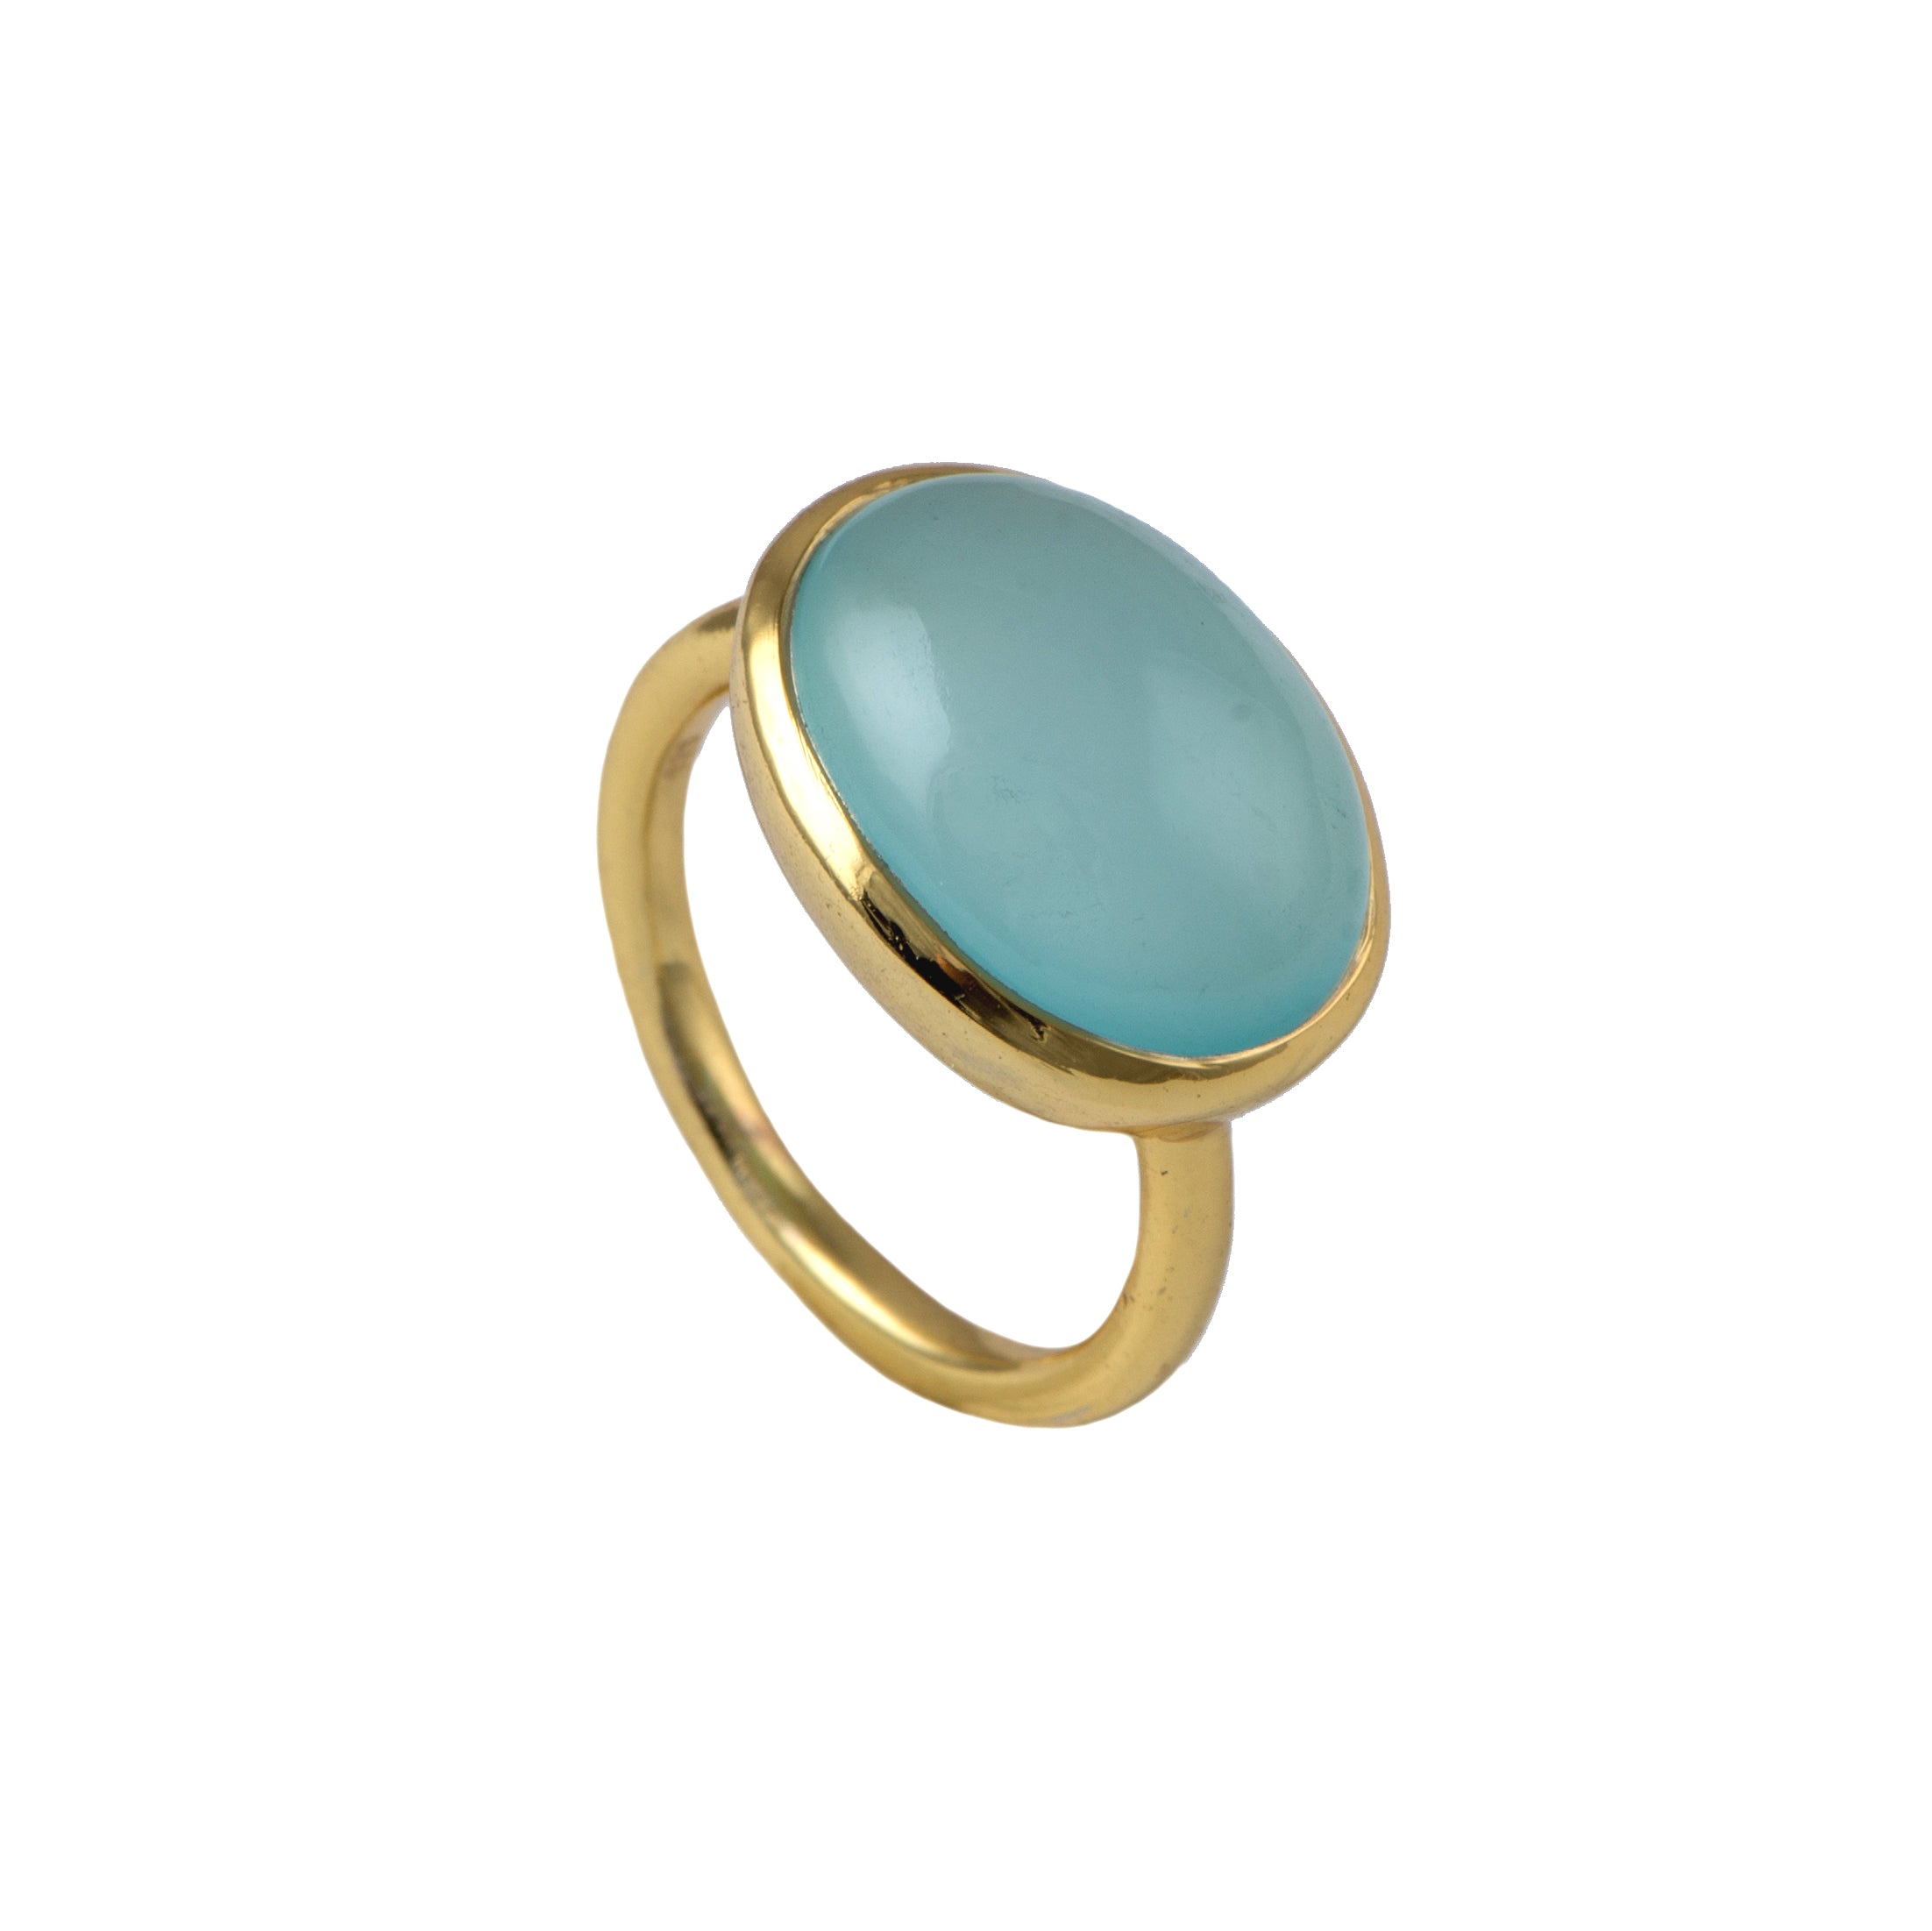 Cabochon Oval Cut Natural Gemstone Gold Plated Sterling Silver Ring - Aqua Chalcedony